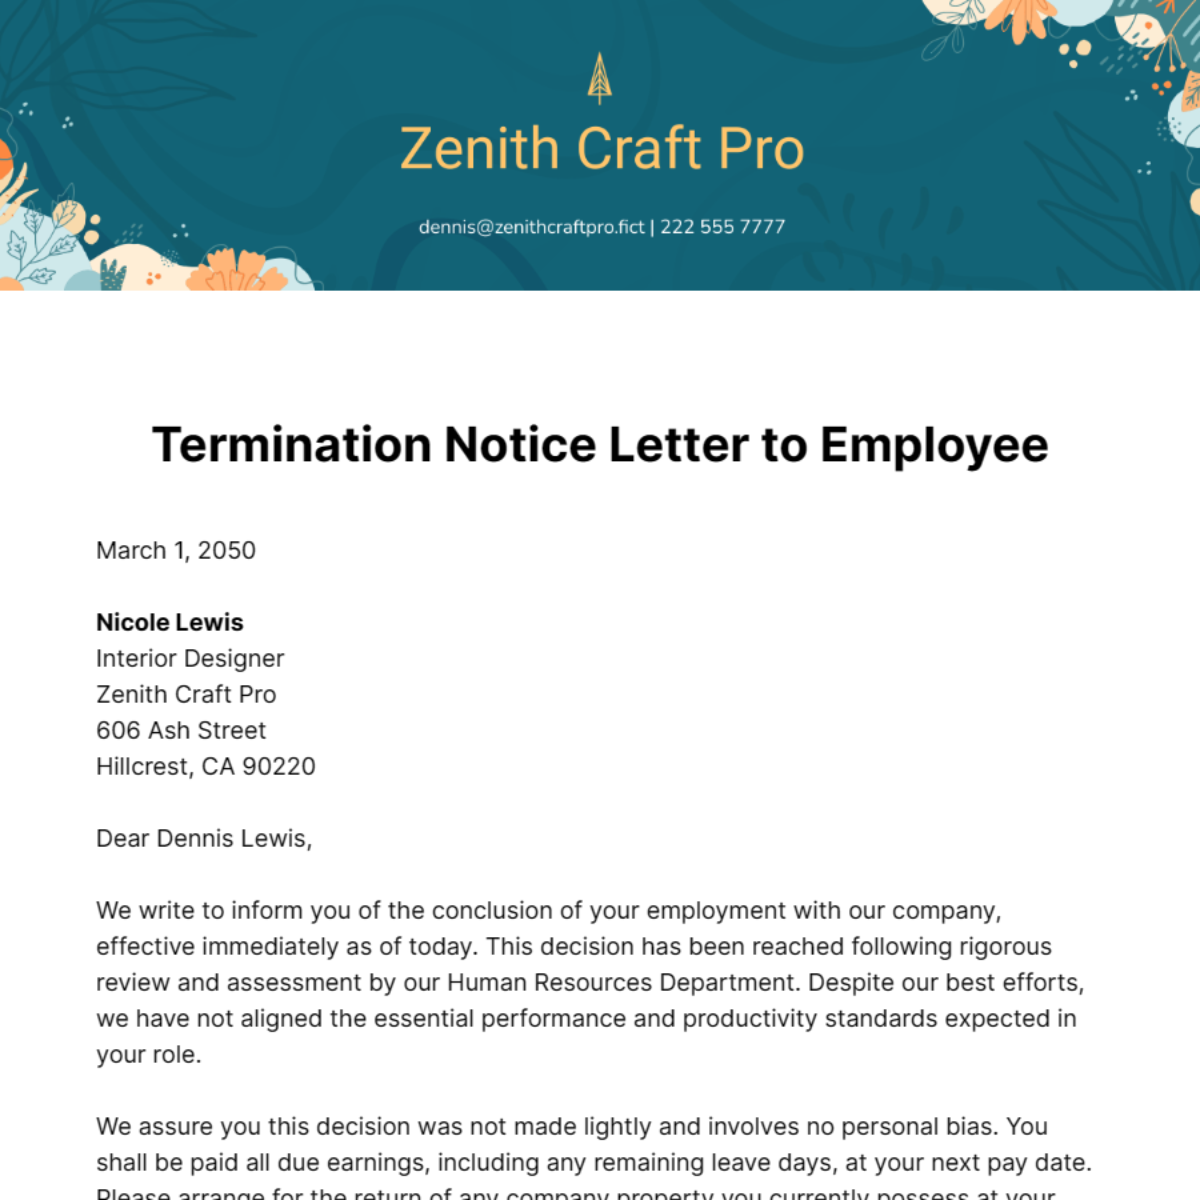 Termination Notice Letter to Employee Template